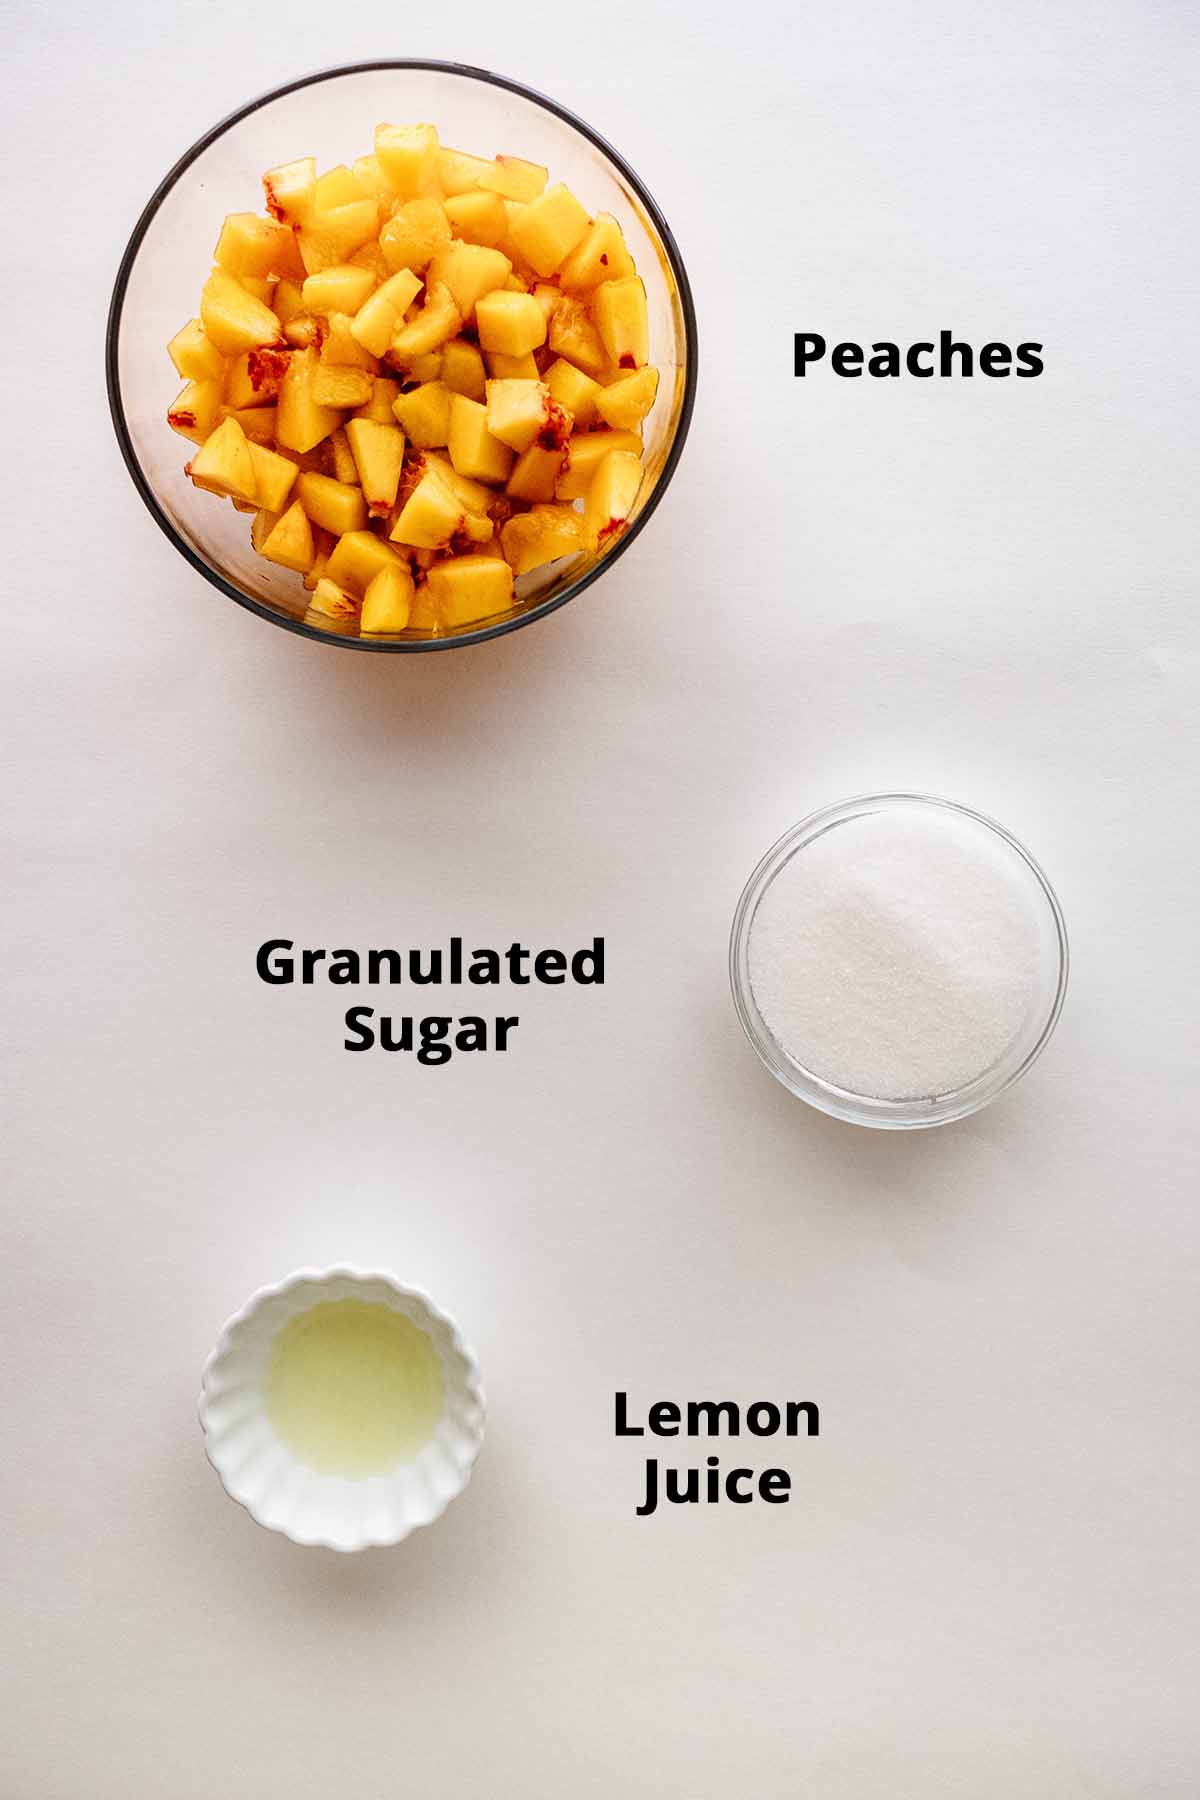 Peach compote ingredients